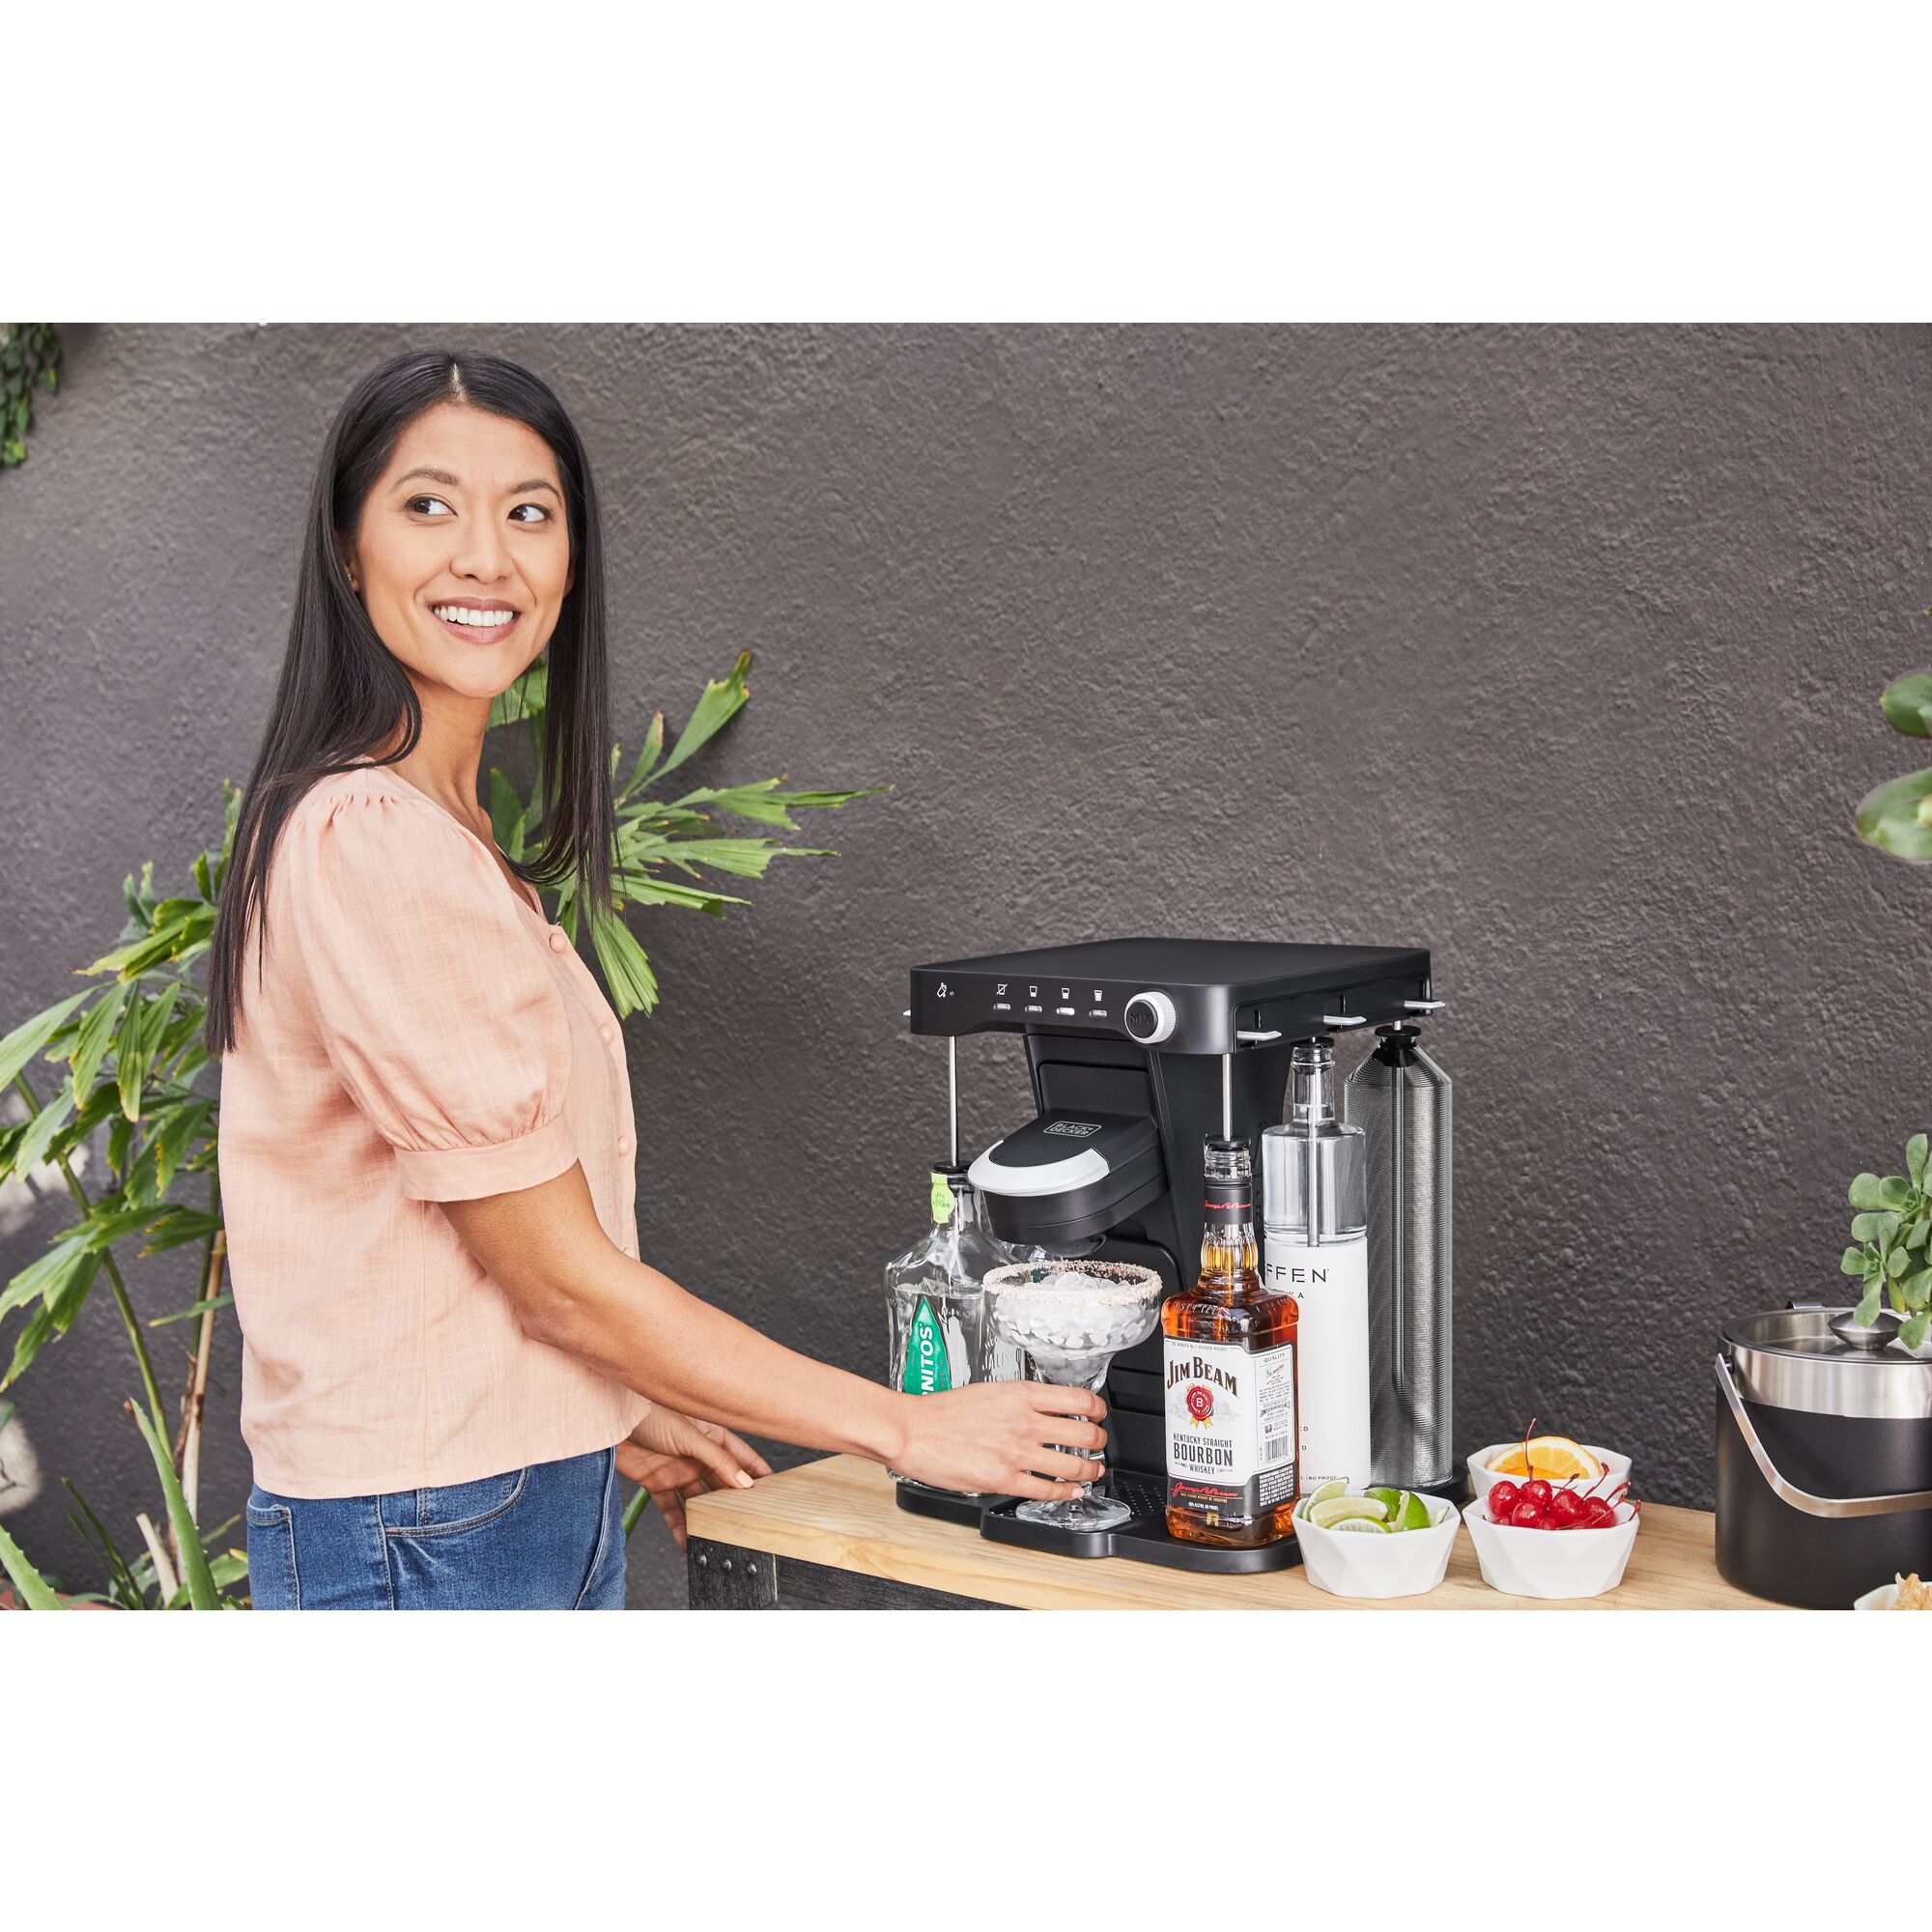 Person using the bev by Black and decker coctail machine with the black and decker ice bucket sitting next to it on a wooden table